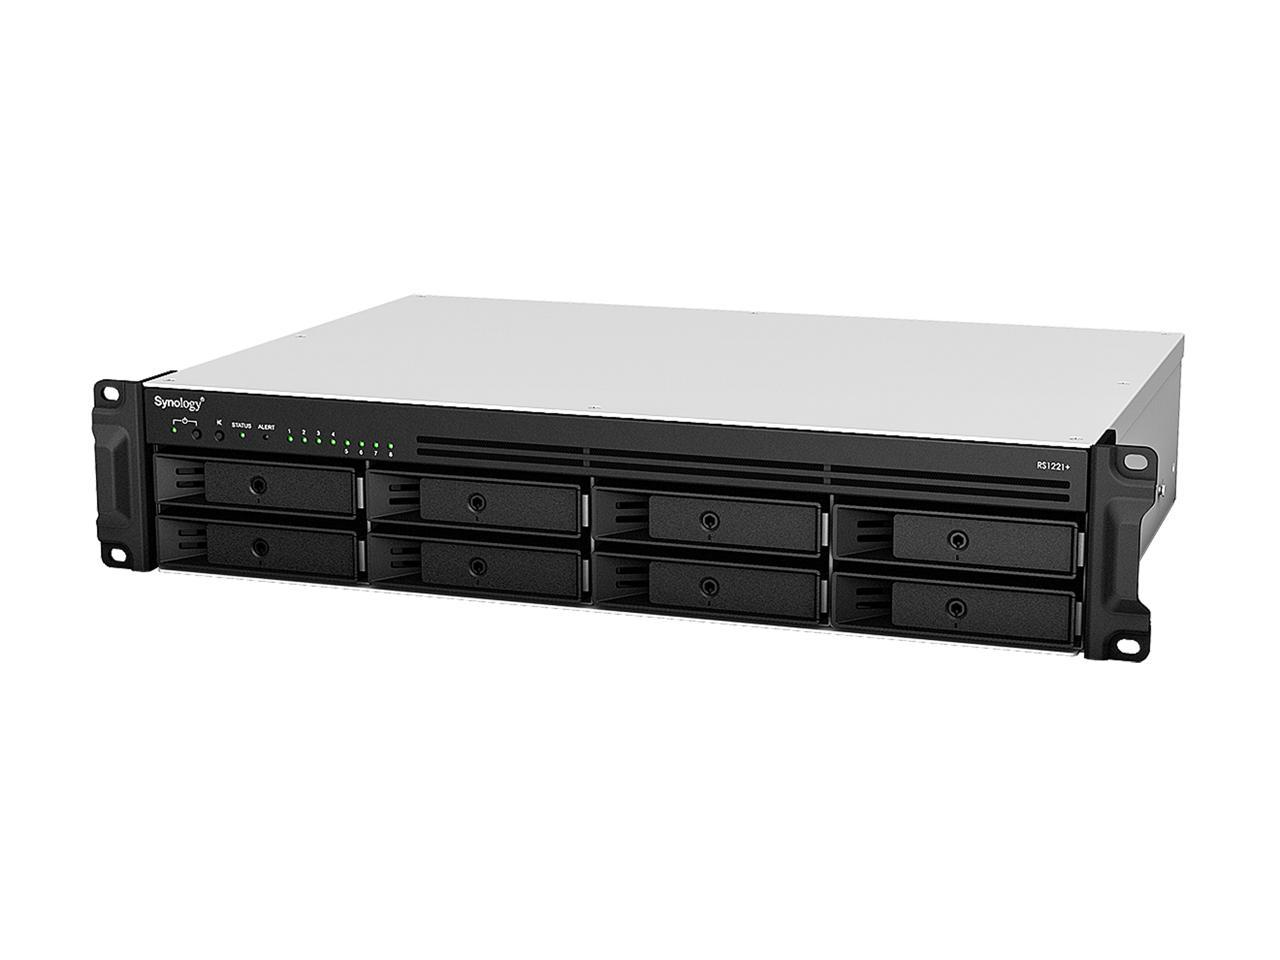 Synology RS1221+ RackStation with 8GB RAM and 96TB (8 x 12TB) of Synology Plus NAS Drives Fully Assembled and Tested